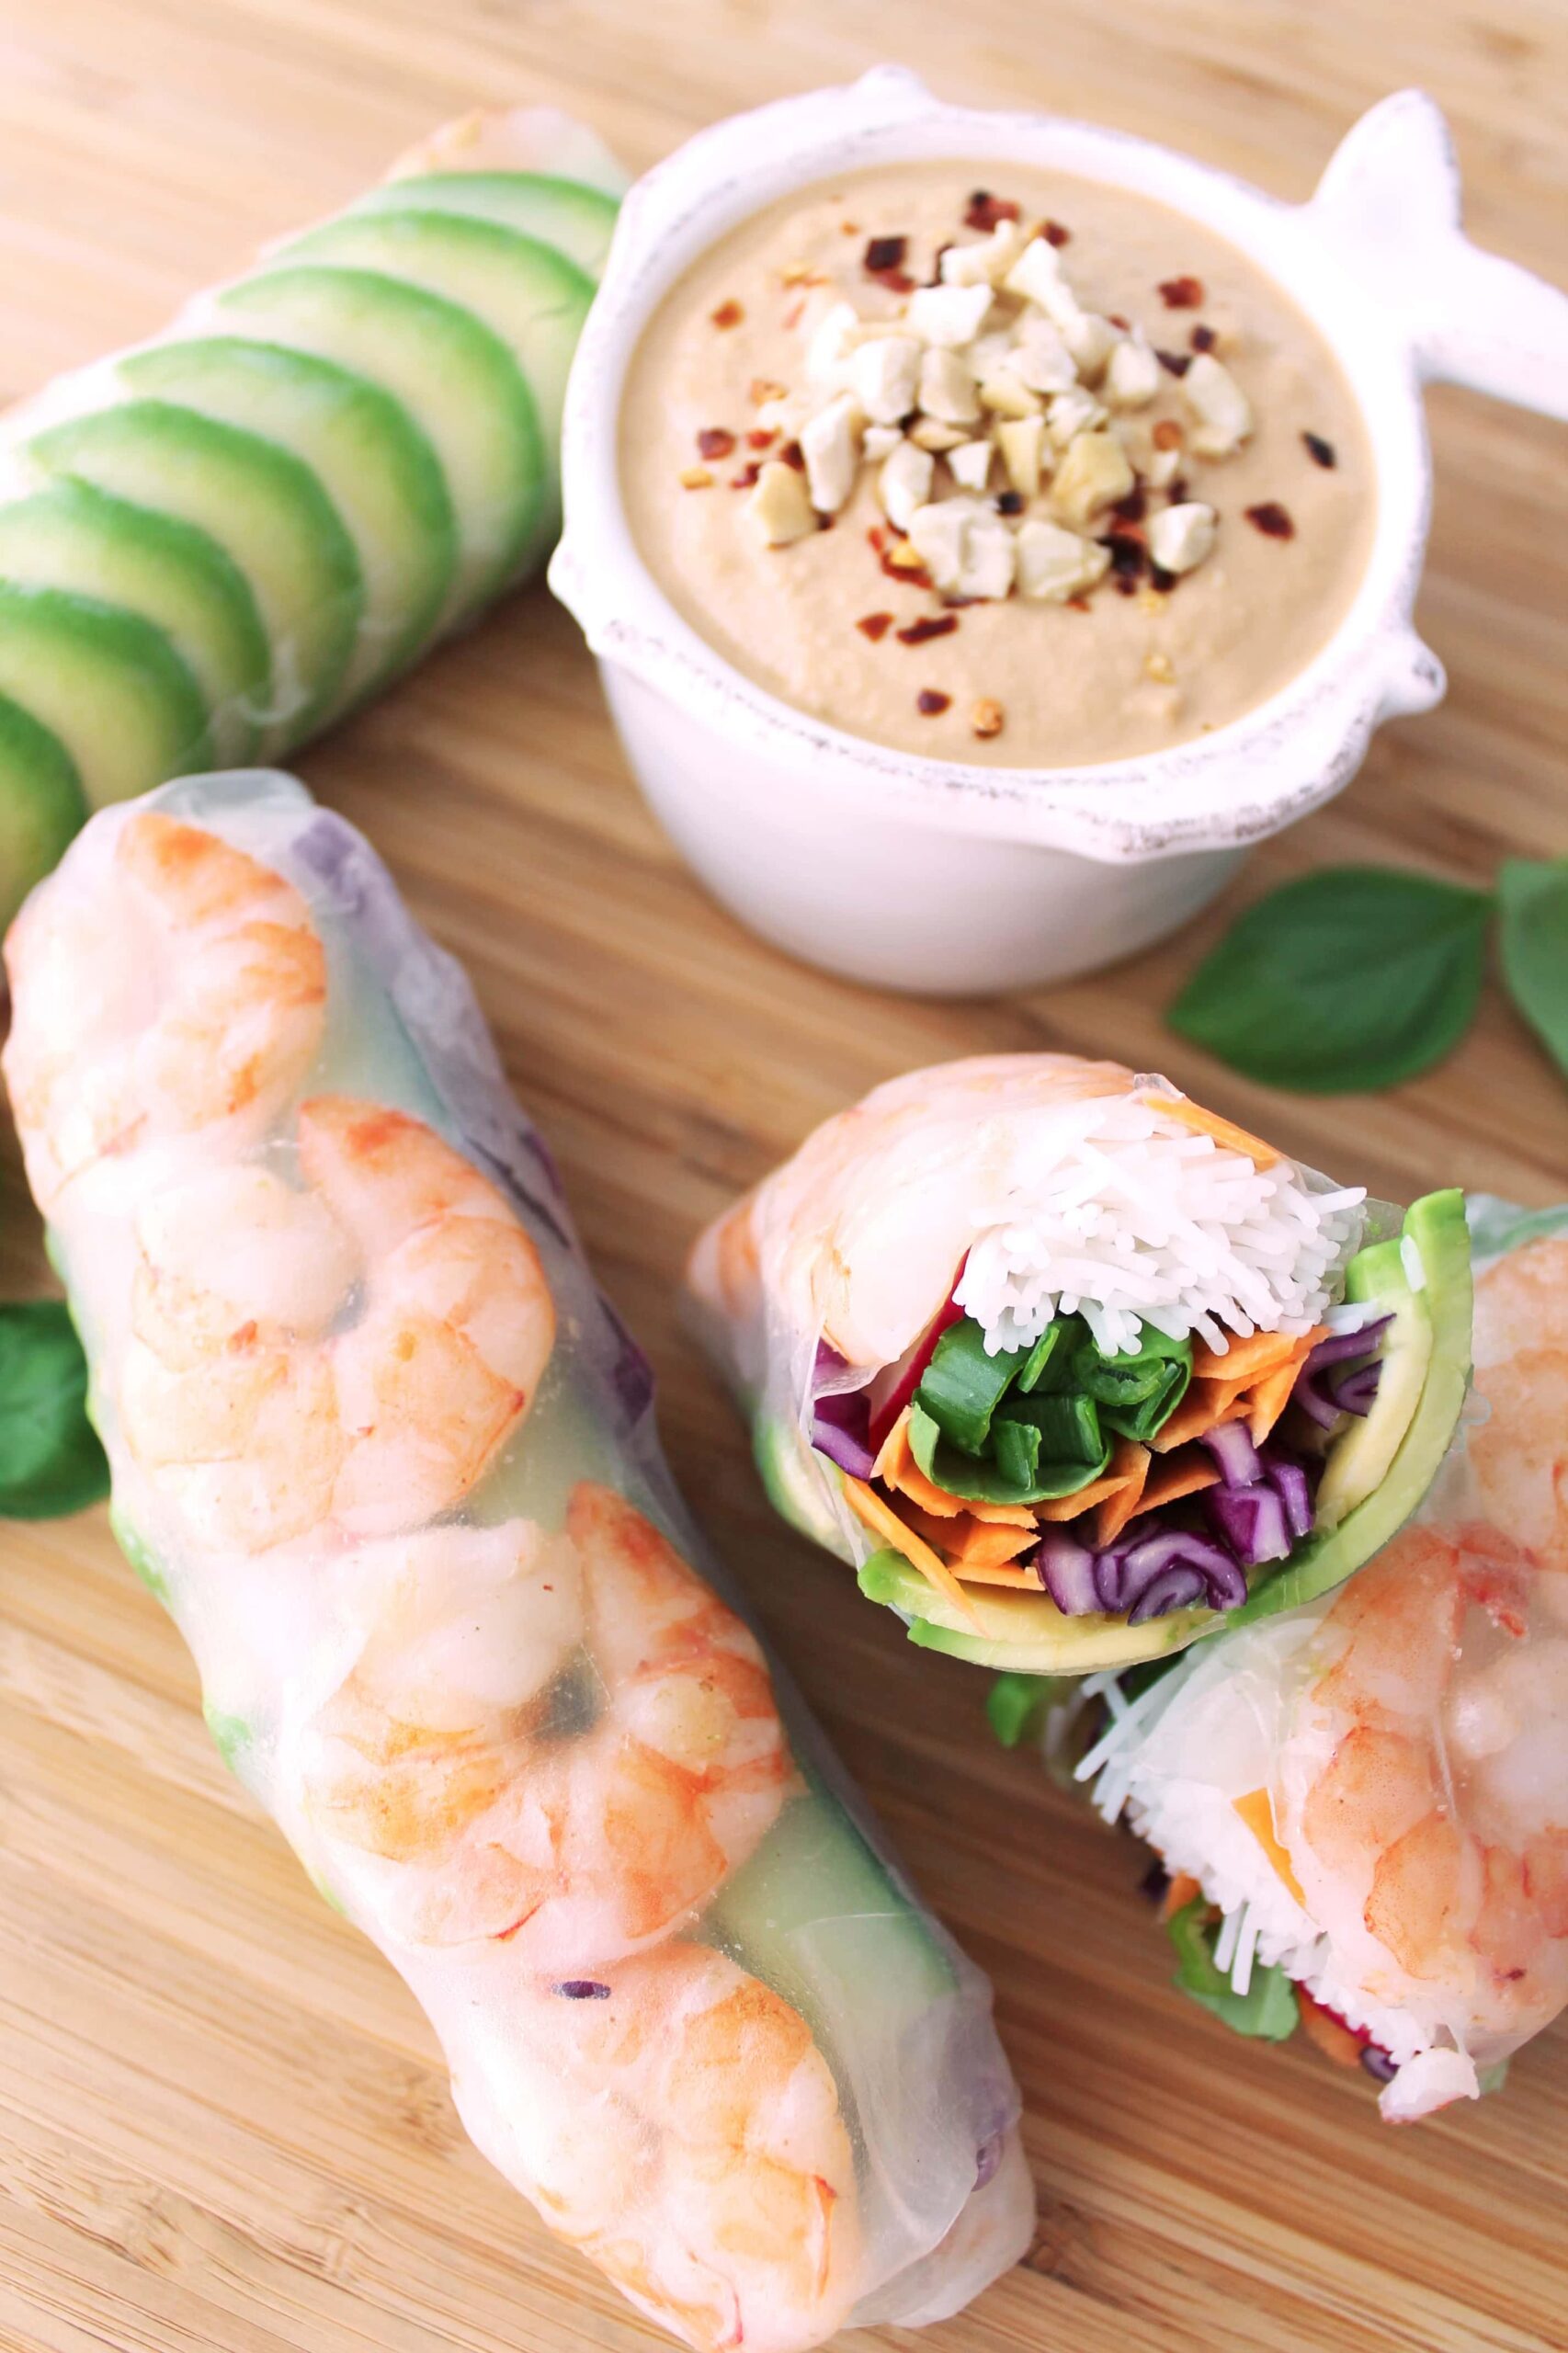  Cashews add a creamy, nutty flavor to the dipping sauce - it's the perfect complement to the rolls.